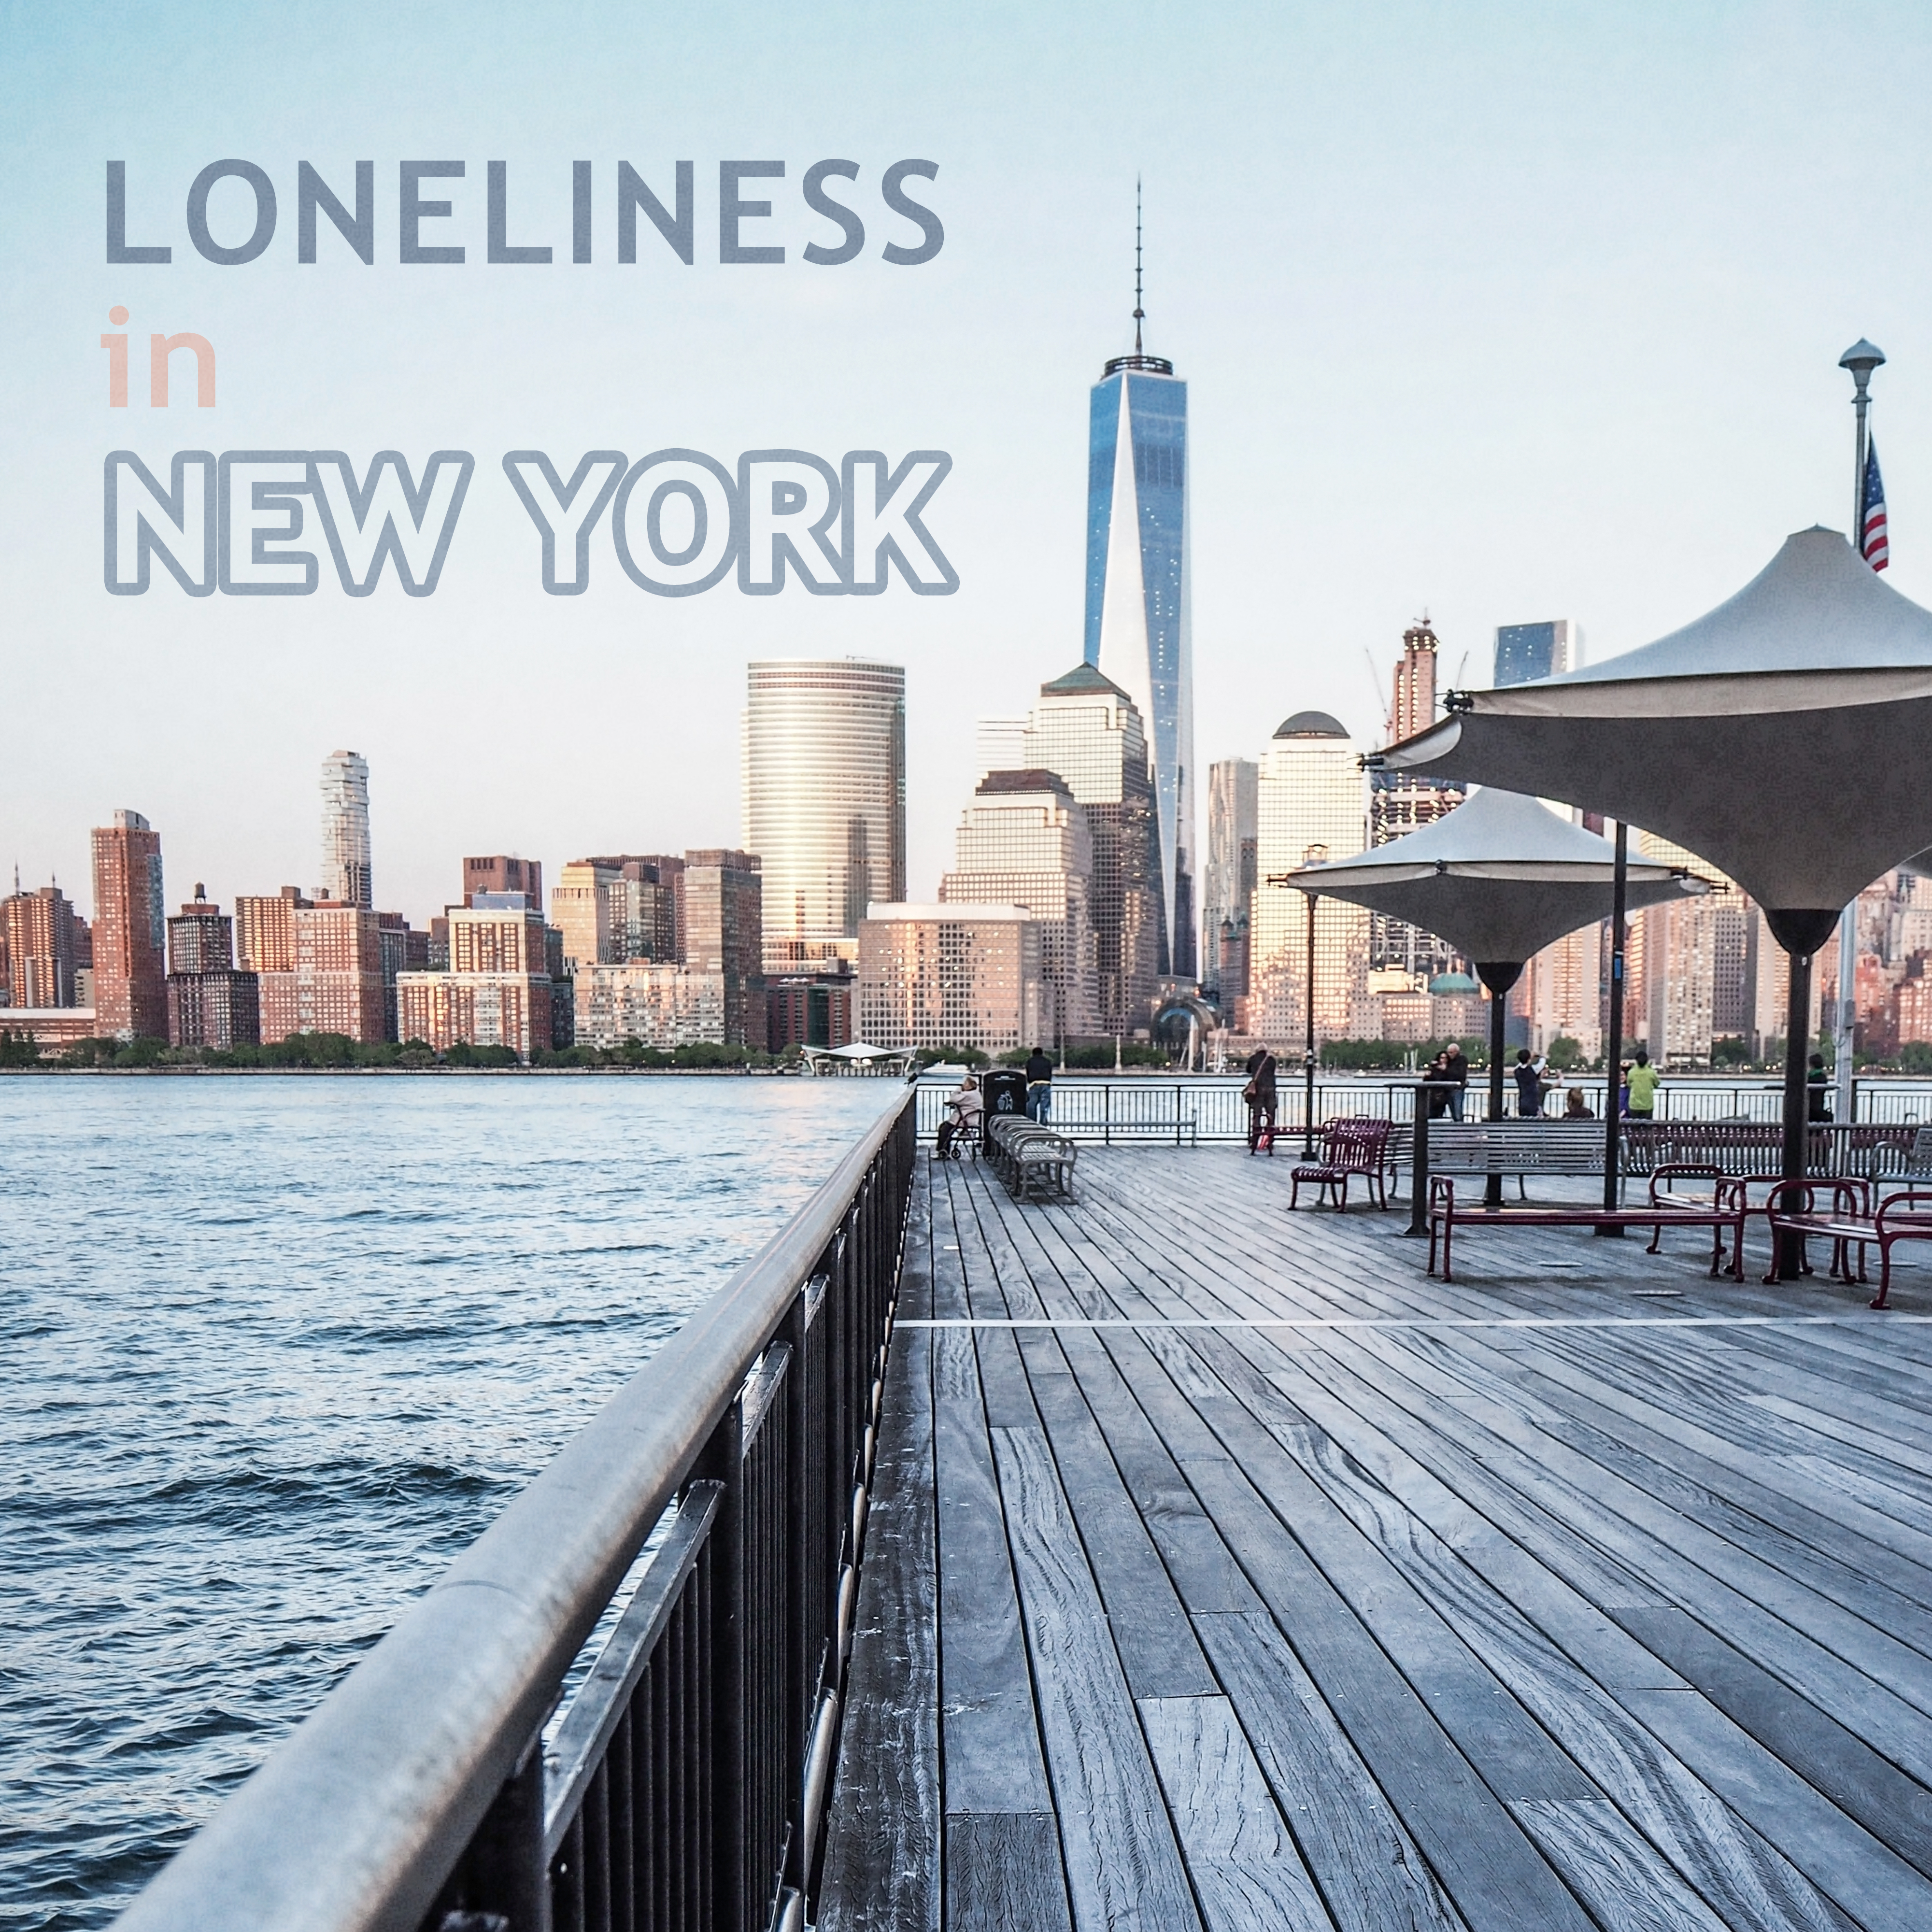 Loneliness in New York – Pure Instrumental Piano, Ambient Jazz, Piano Bar